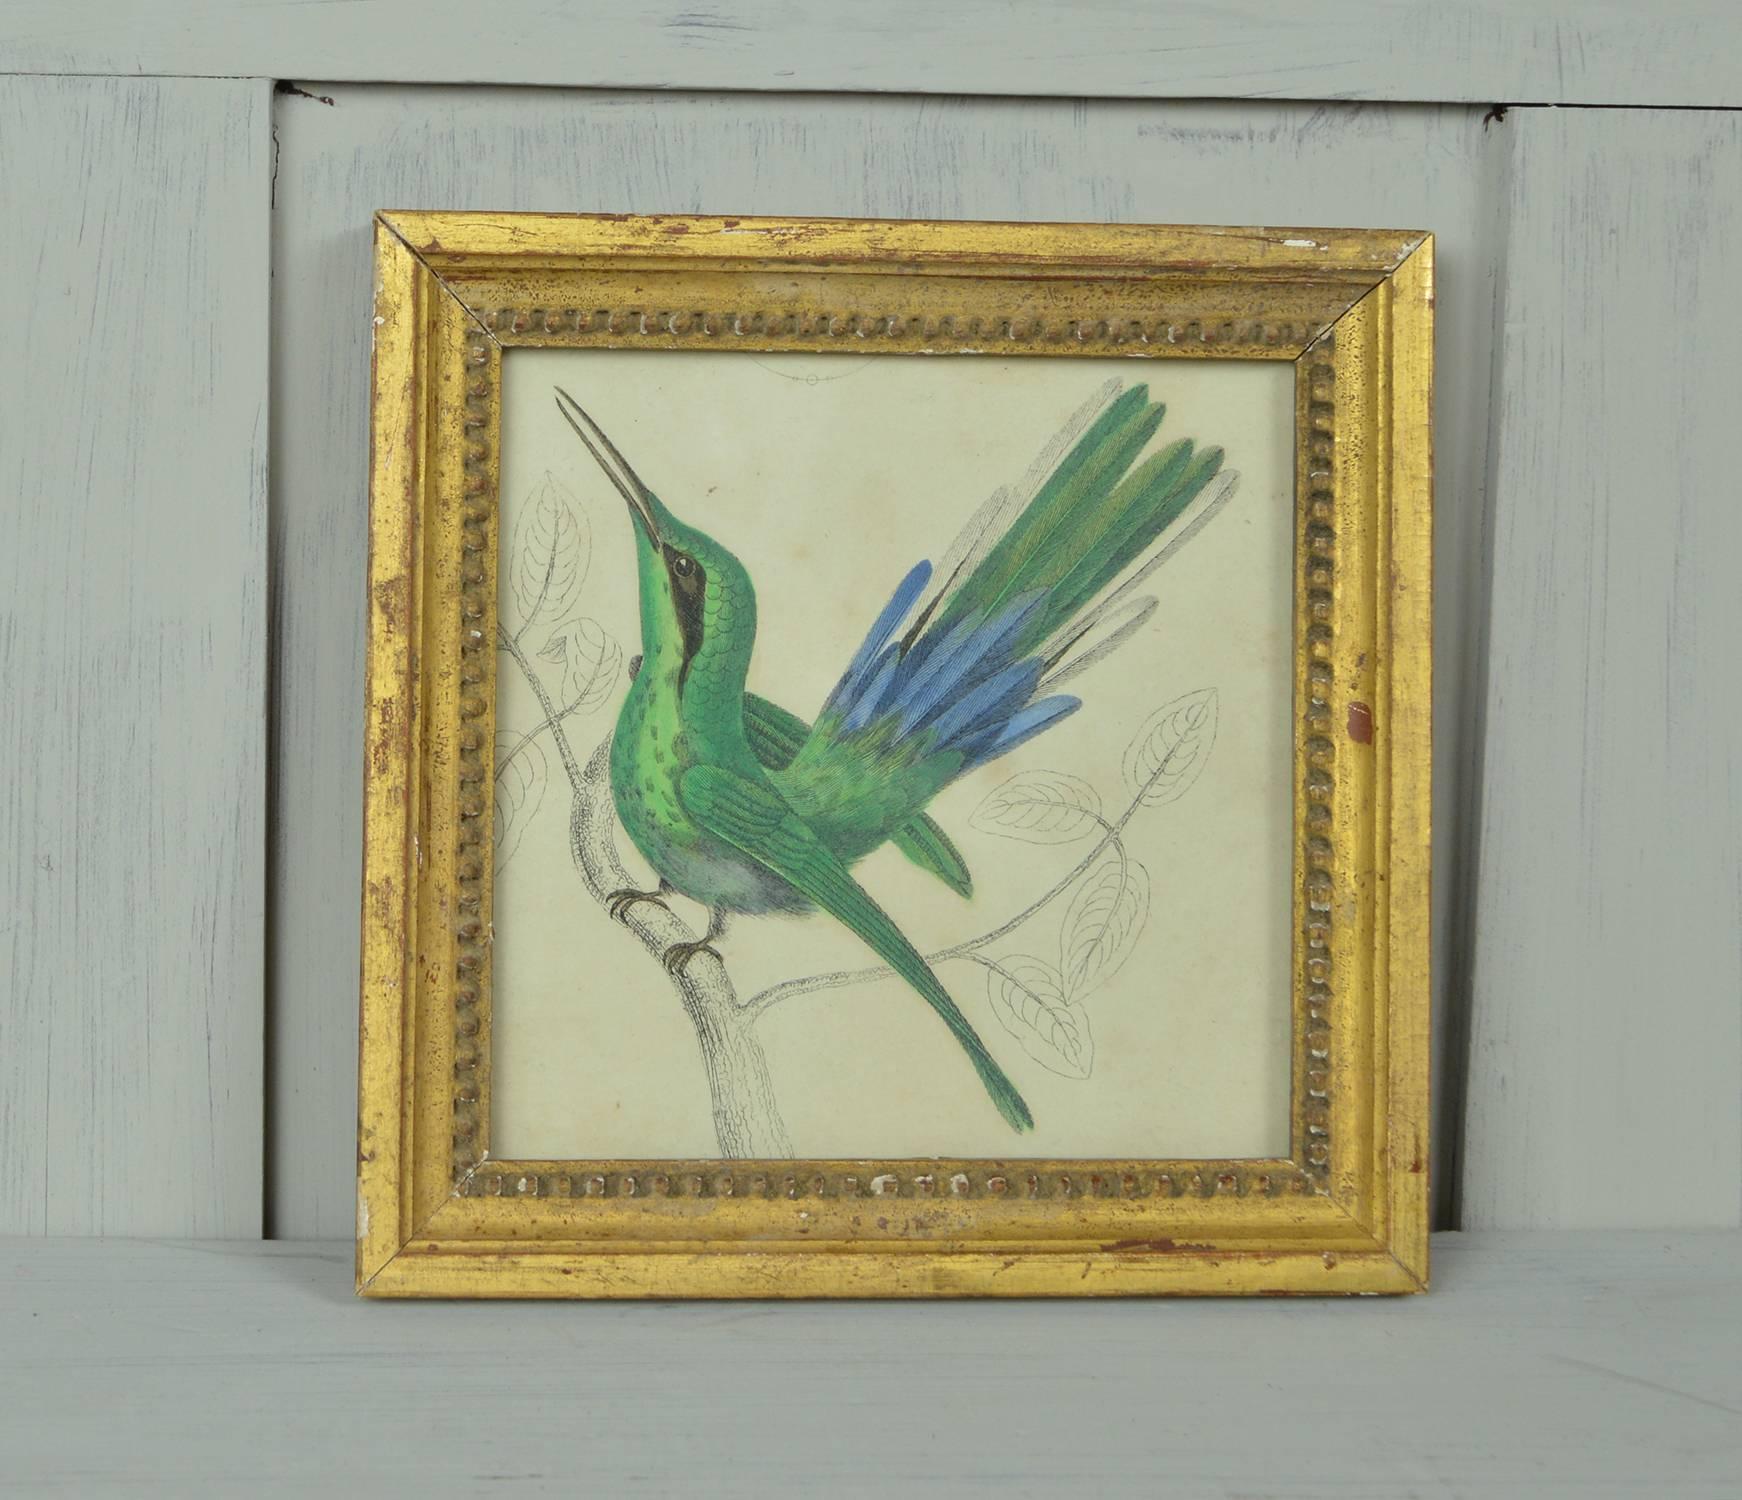 Great image of a hummingbird.

Hand-colored lithograph.

Original color.

From Goldsmith's Animated Nature.

Published by Fullarton, London and Edinburgh, 1847.

Presented in antique gilt frame.

The measurement given below is the frame